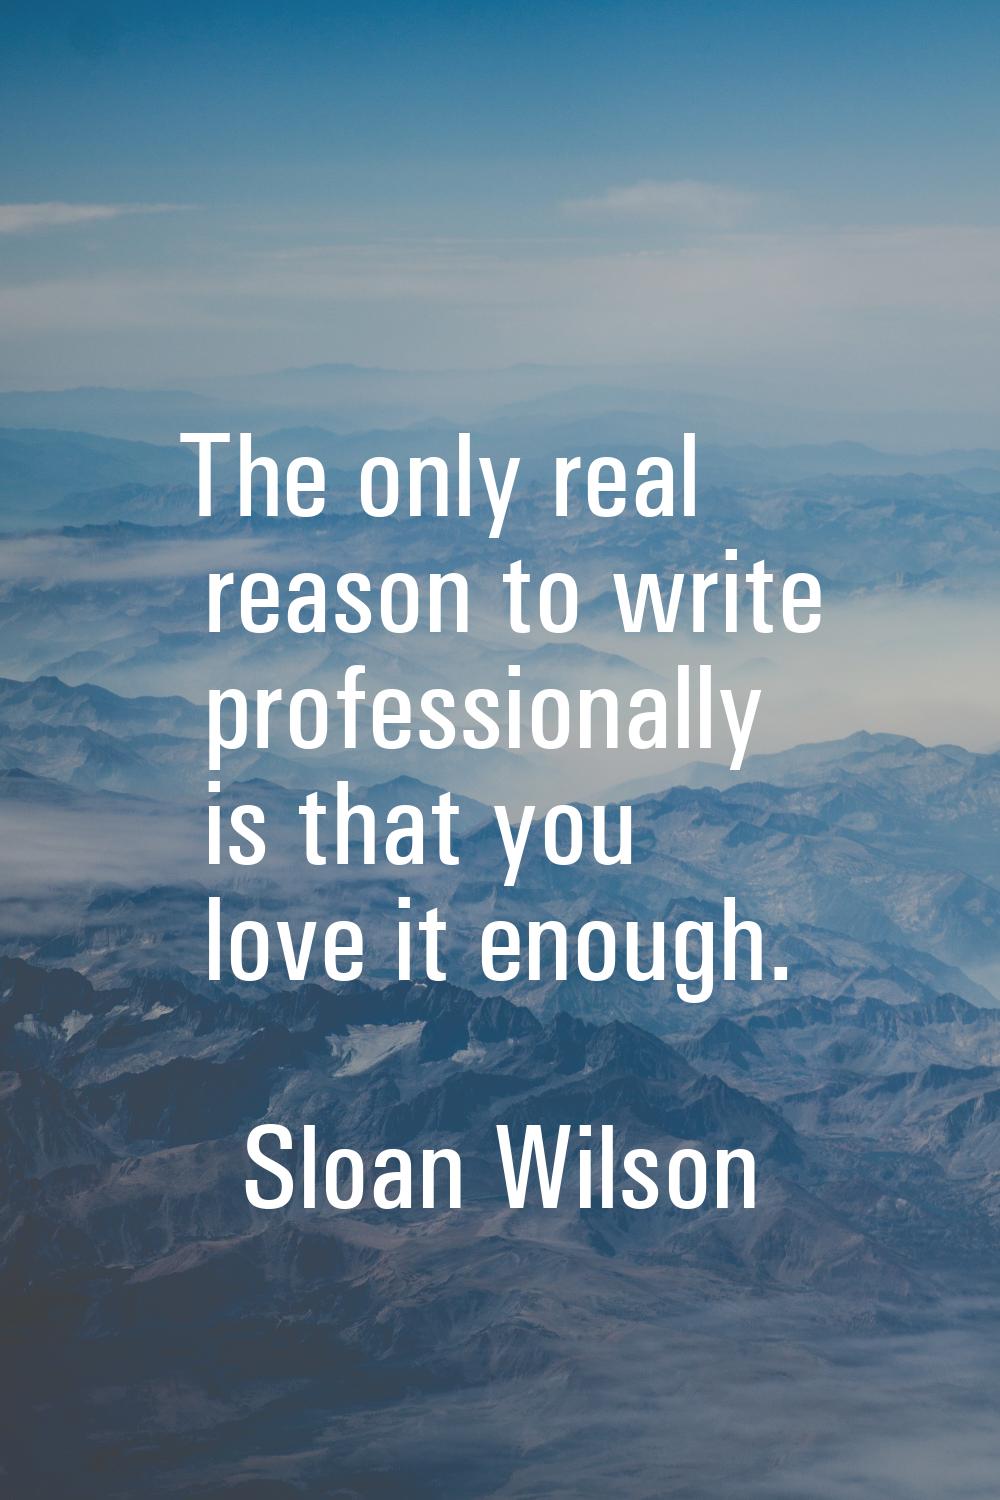 The only real reason to write professionally is that you love it enough.